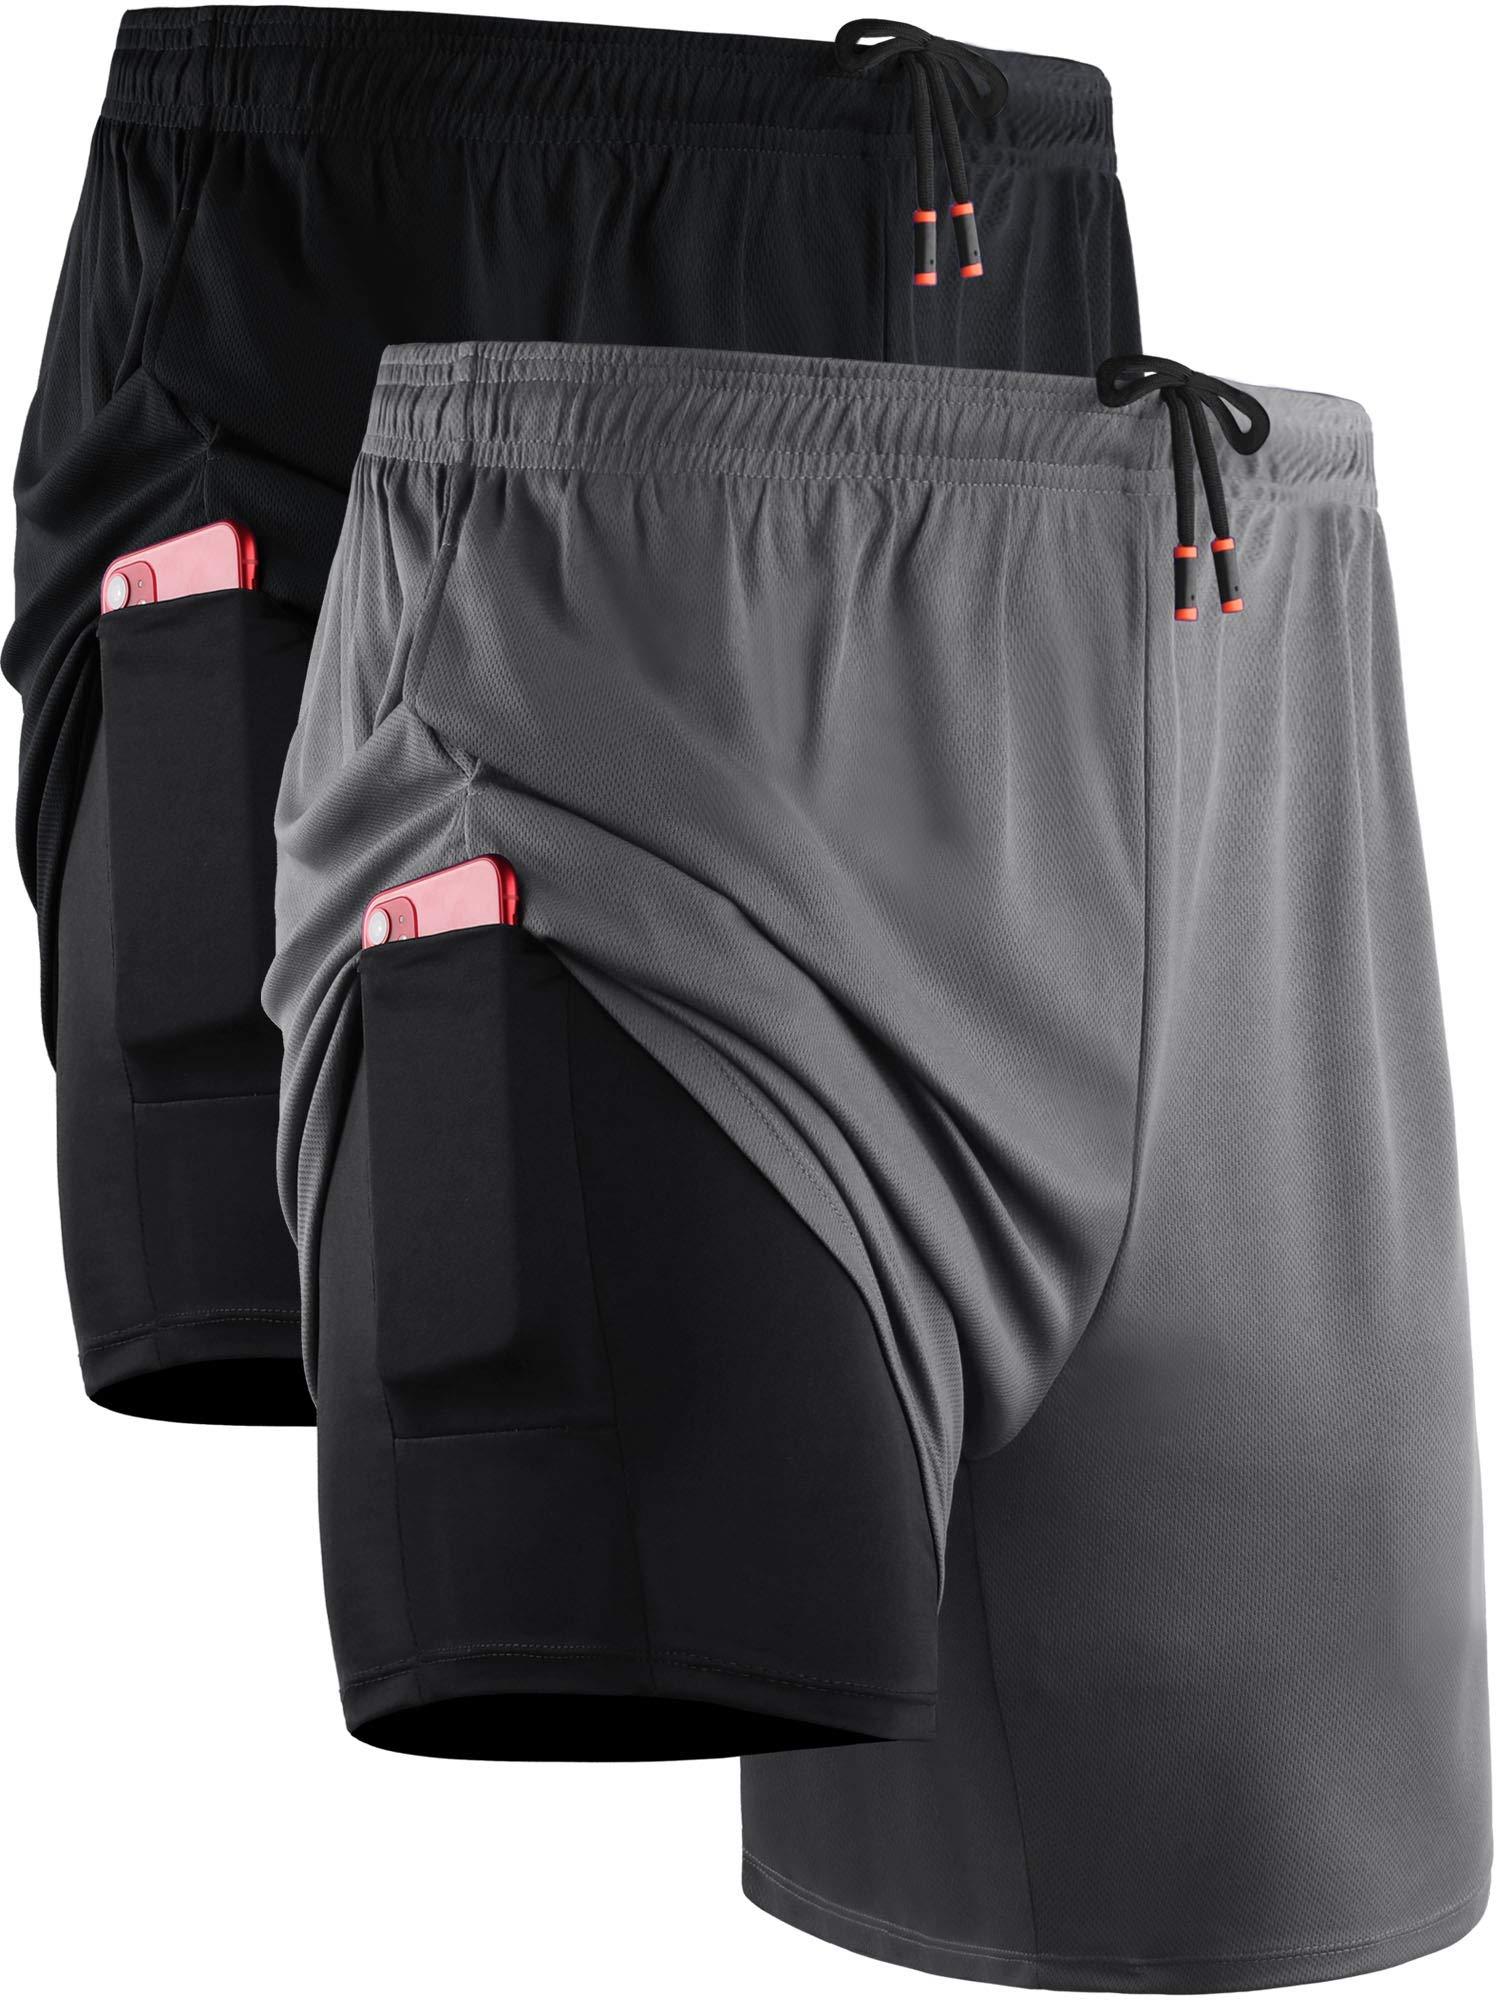 Neleus Mens 2 In 1 Running Shorts With Liner,Dry Fit Workout Shorts With Pockets,6070,2 Pack,Blackgrey,Us M,Eu L